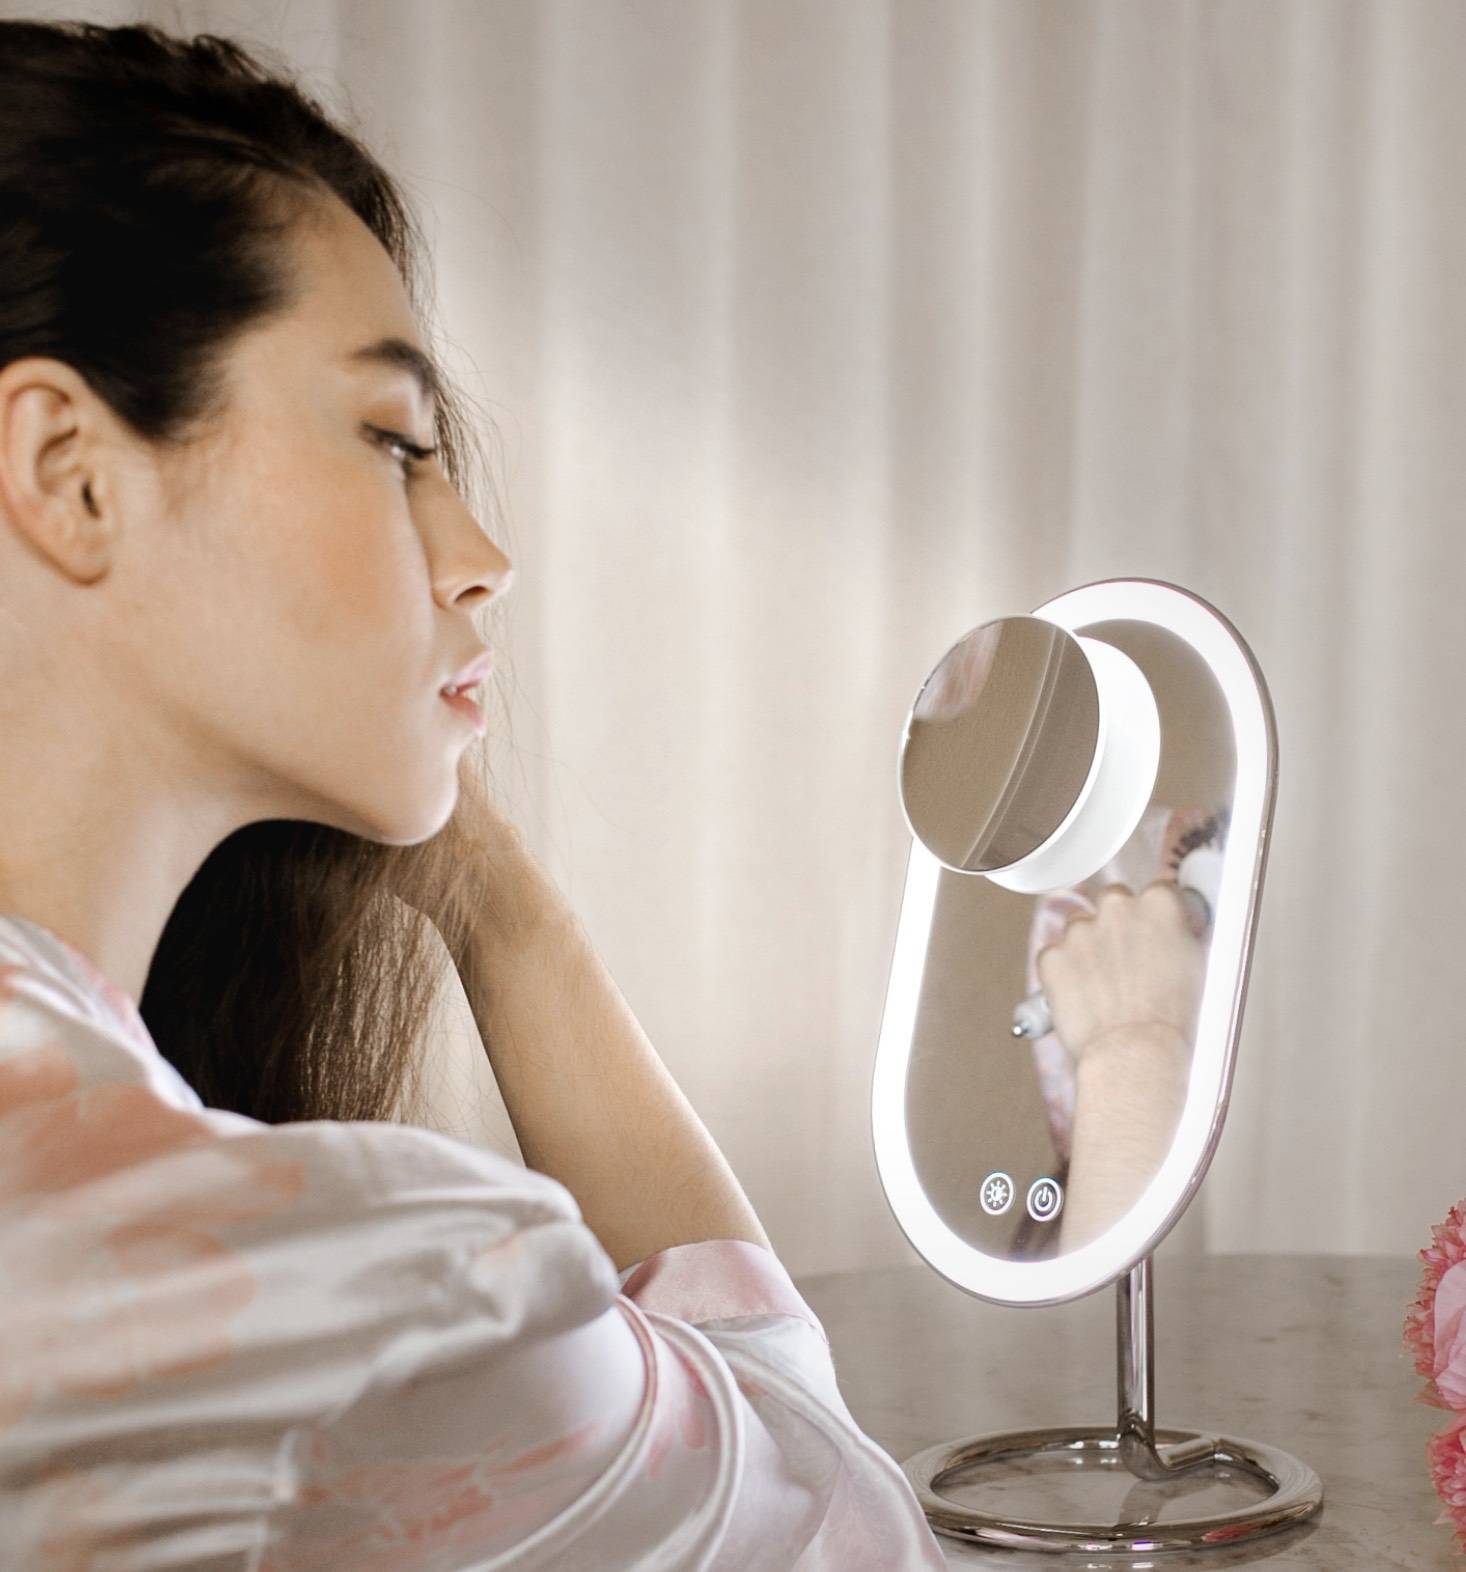 truth about high magnification mirrors